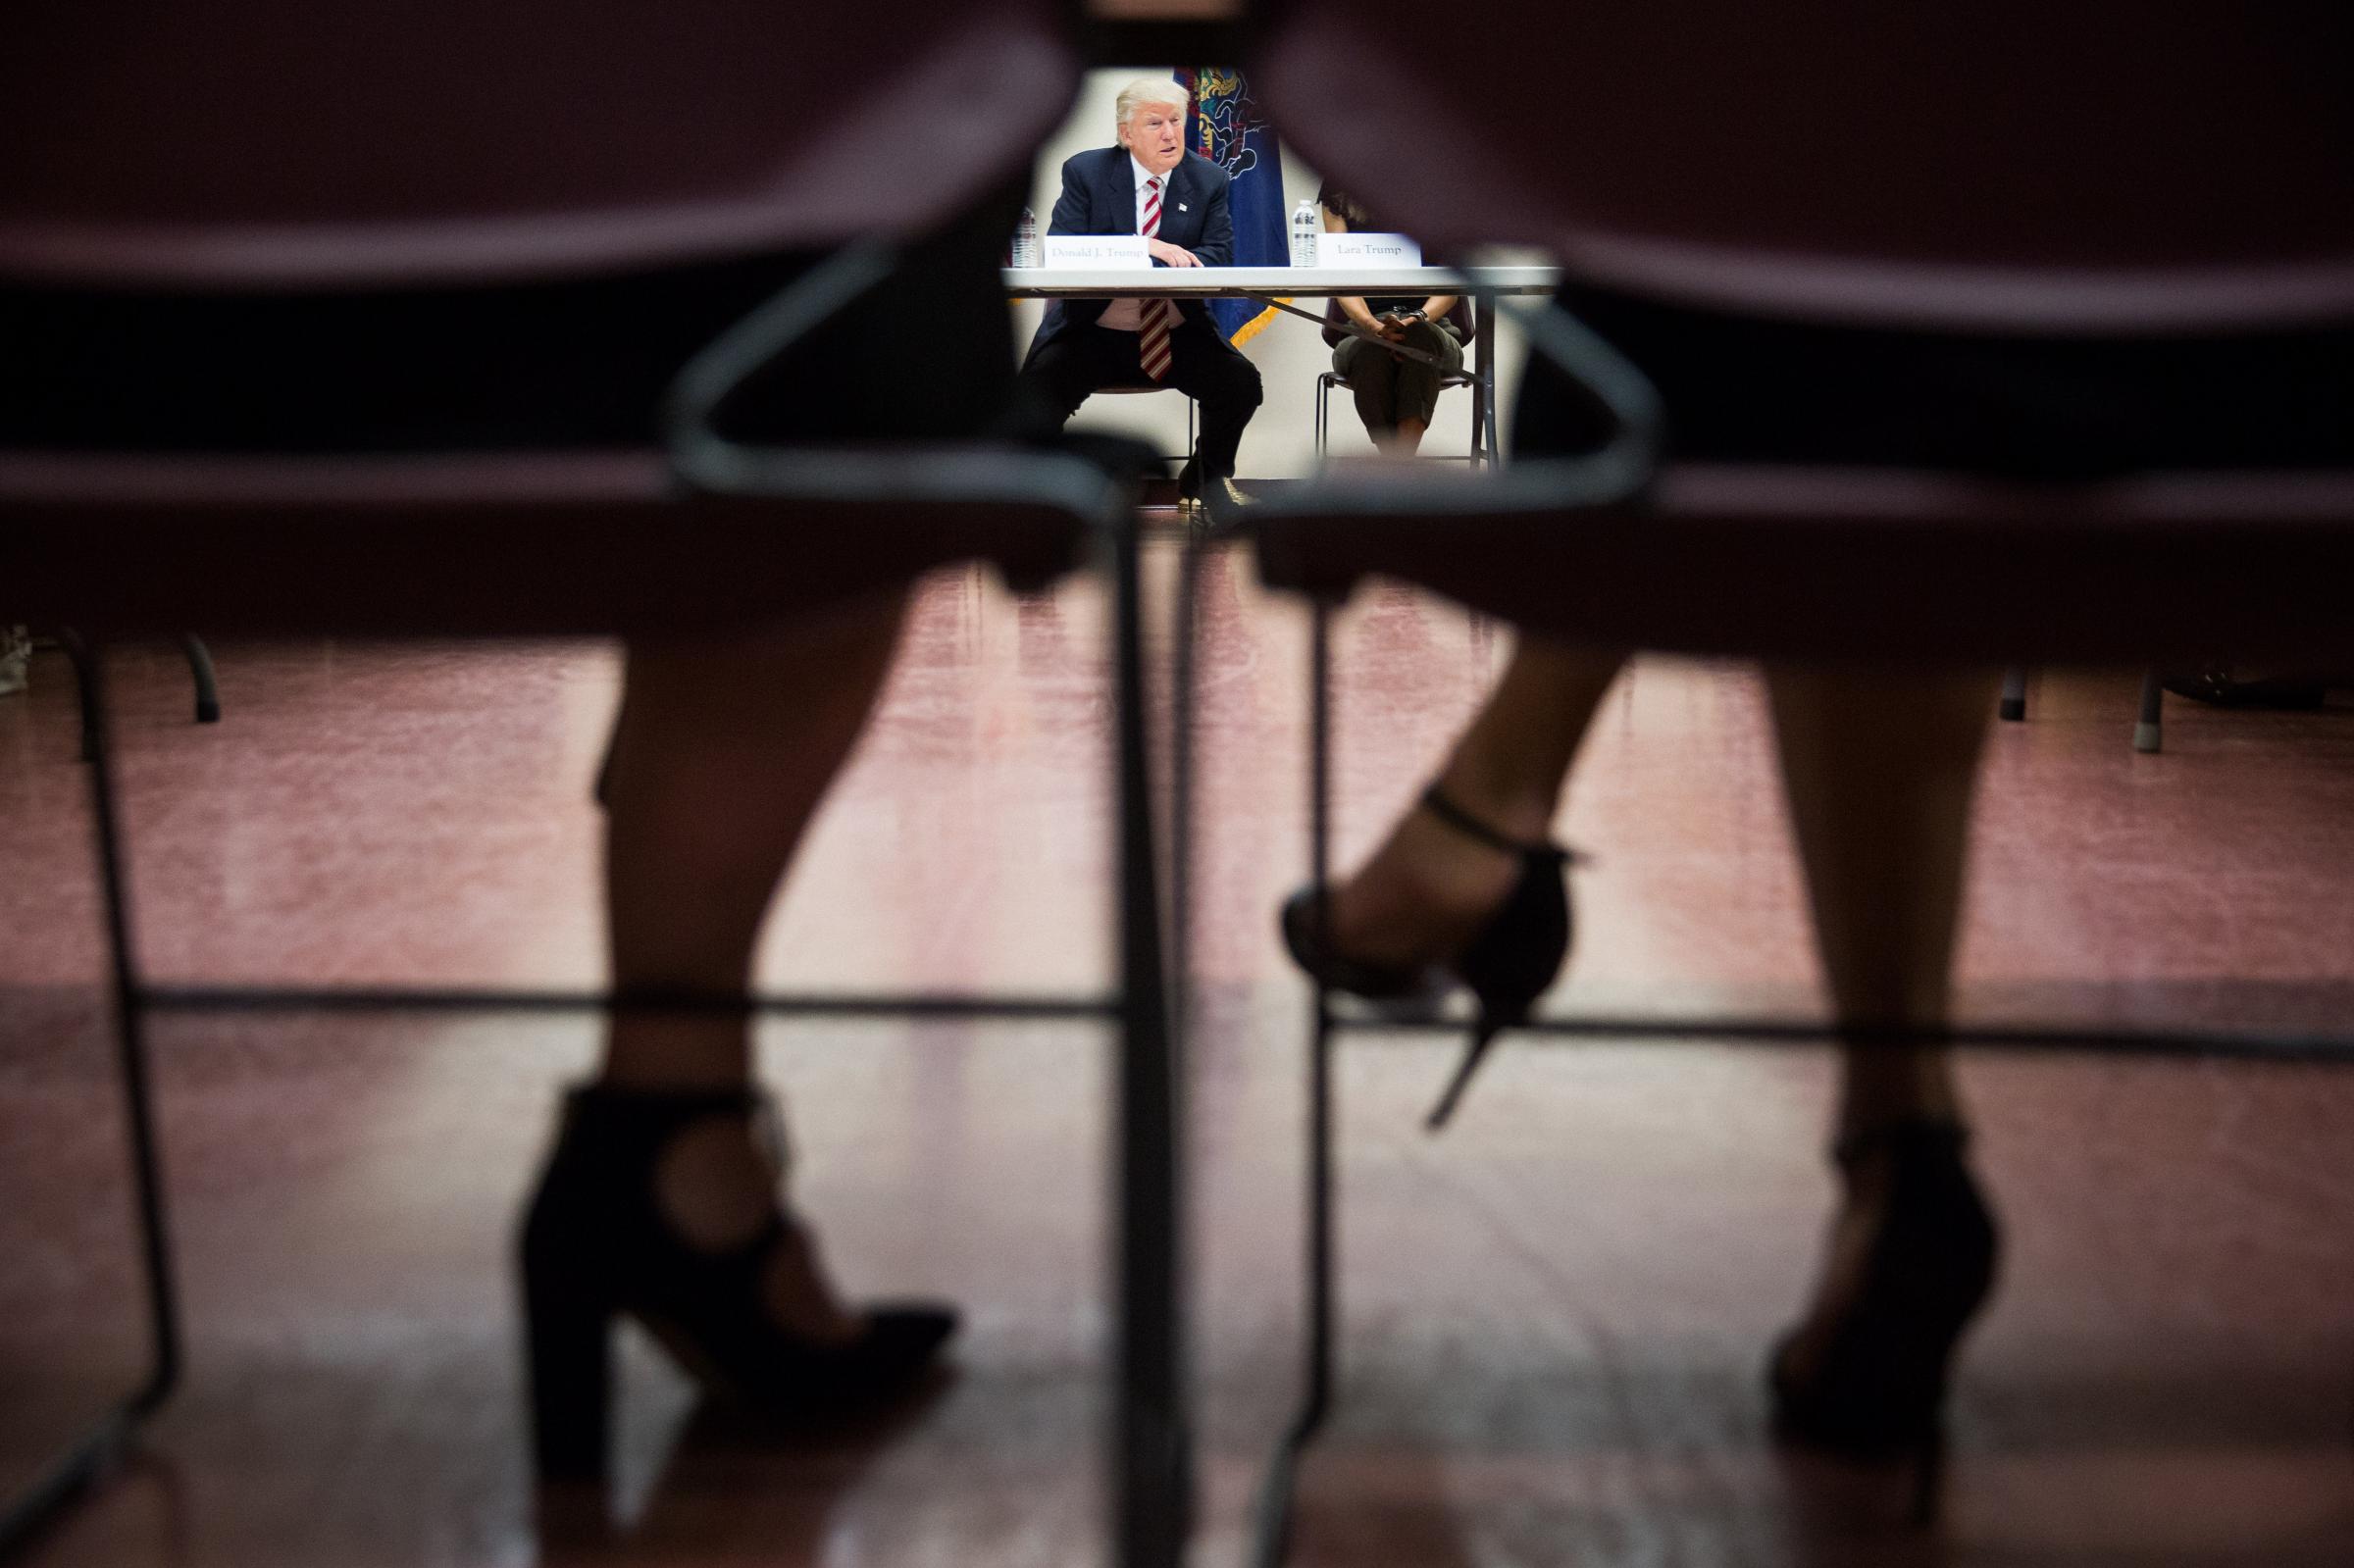 Donald Trump attends a roundtable discussion of child care issues before a campaign event in Aston, Pa.